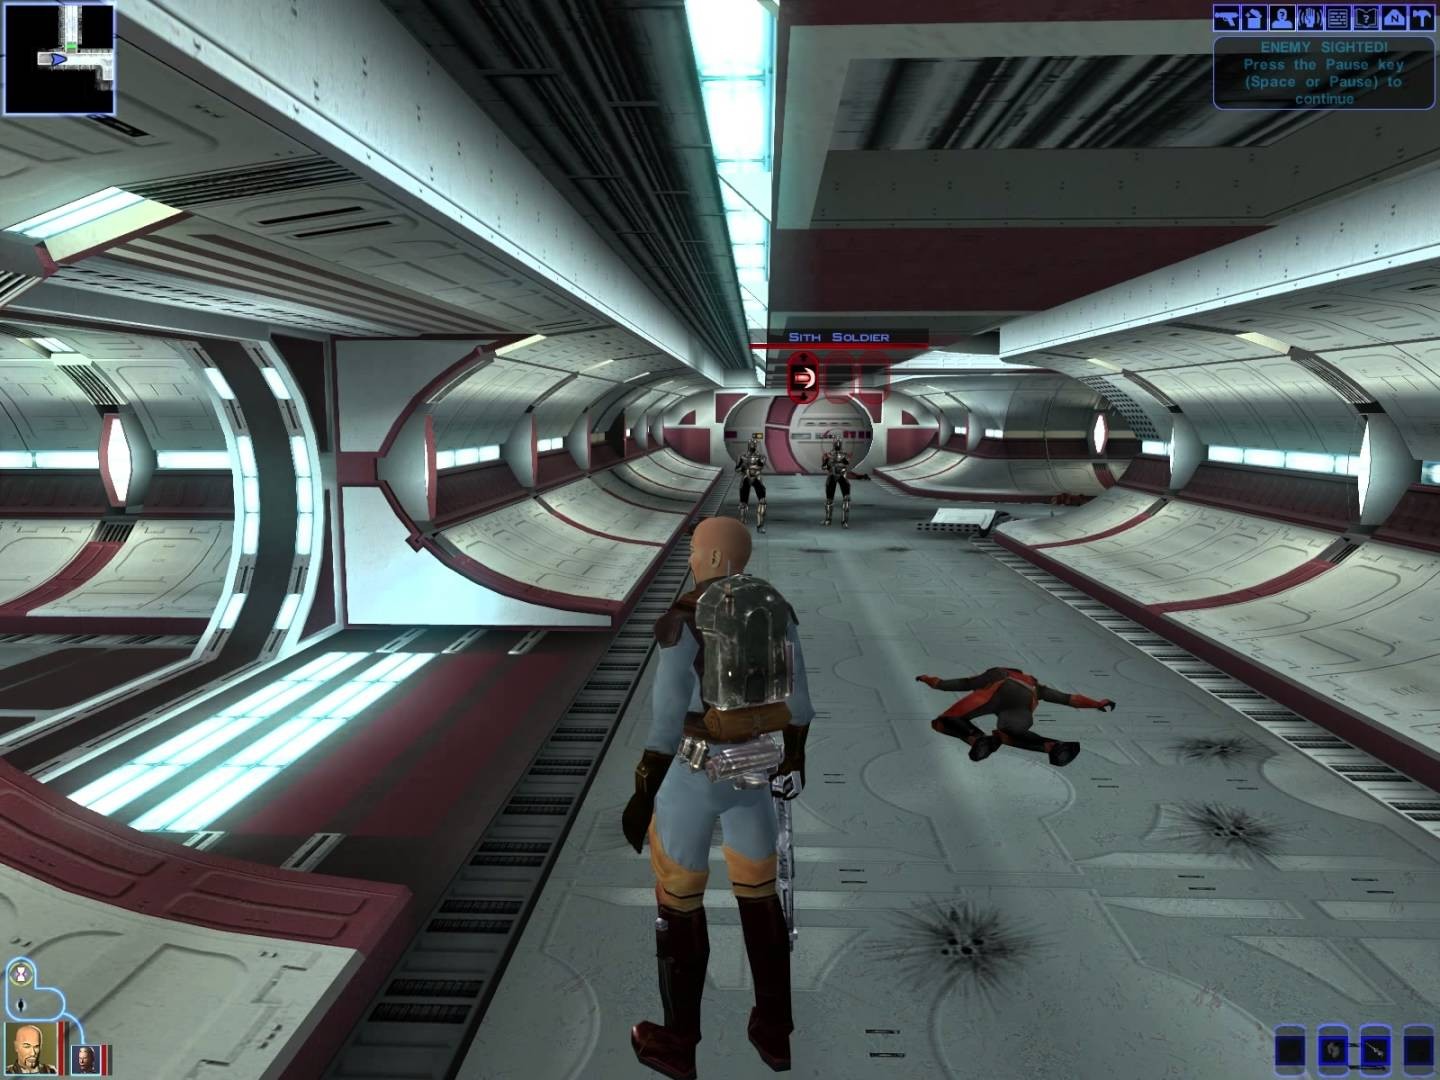 Buy Star Wars: Knights of the Old Republic PC Steam key! Cheap price